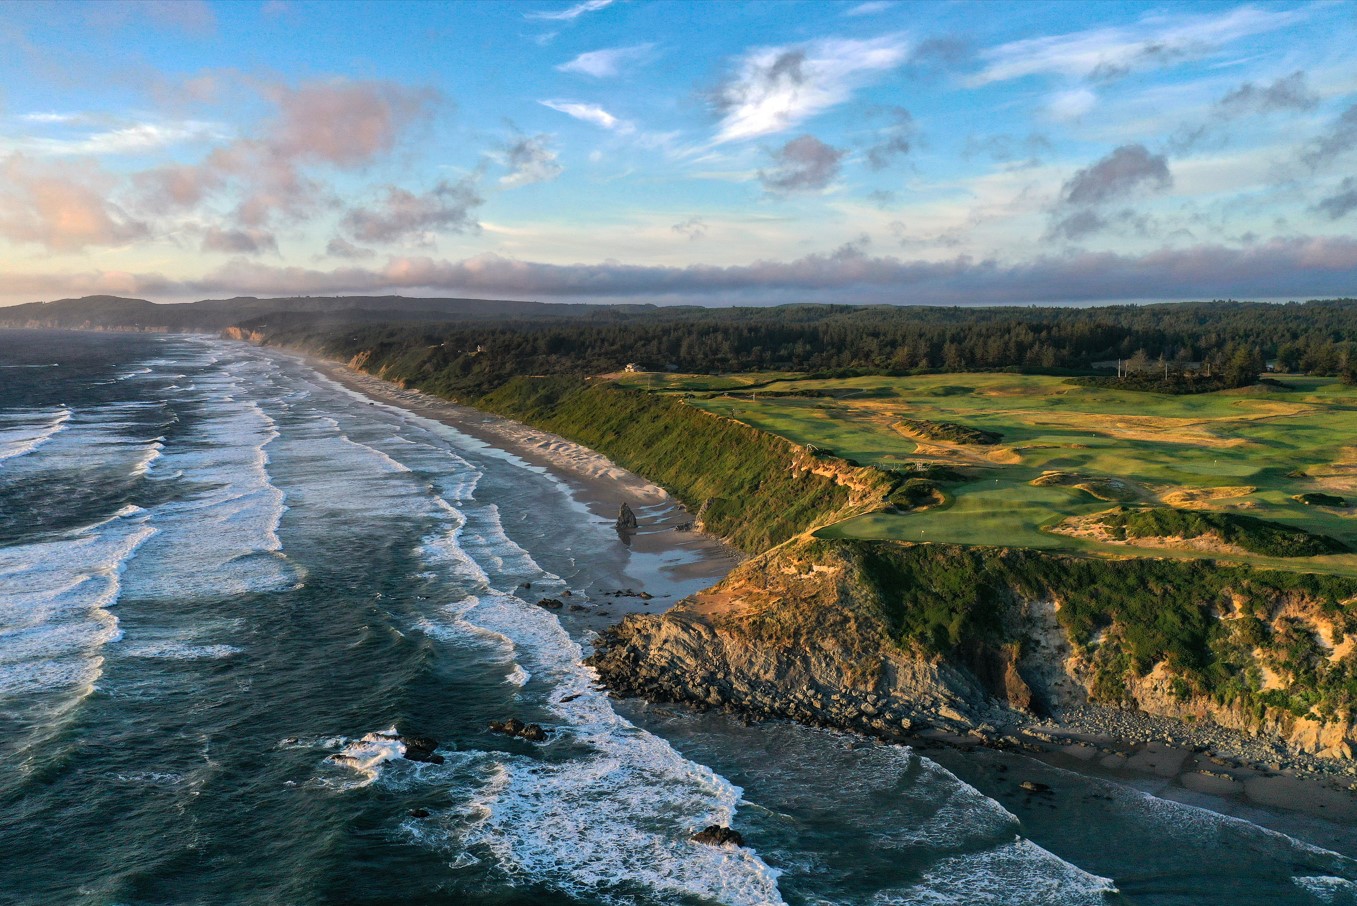 <em><b>Course Location: Bandon, Oregon</b></em> The second course from Bandon Dunes Golf Resort on this list, Sheep Ranch is a premiere coastal golfing experience. Renovated by the world-class design team of Coore & Crenshaw, the Sheep Ranch was for many years a mysterious golf landscape just north of Bandon Dunes Golf Resort. Now with one mile of ocean frontage, nine green sites right along the edge of the coast, and stunning Pacific Ocean views on every hole, Sheep Ranch continues Mike Keiser's vision of “Golf As It Was Meant to Be” on the Pacific Coast.